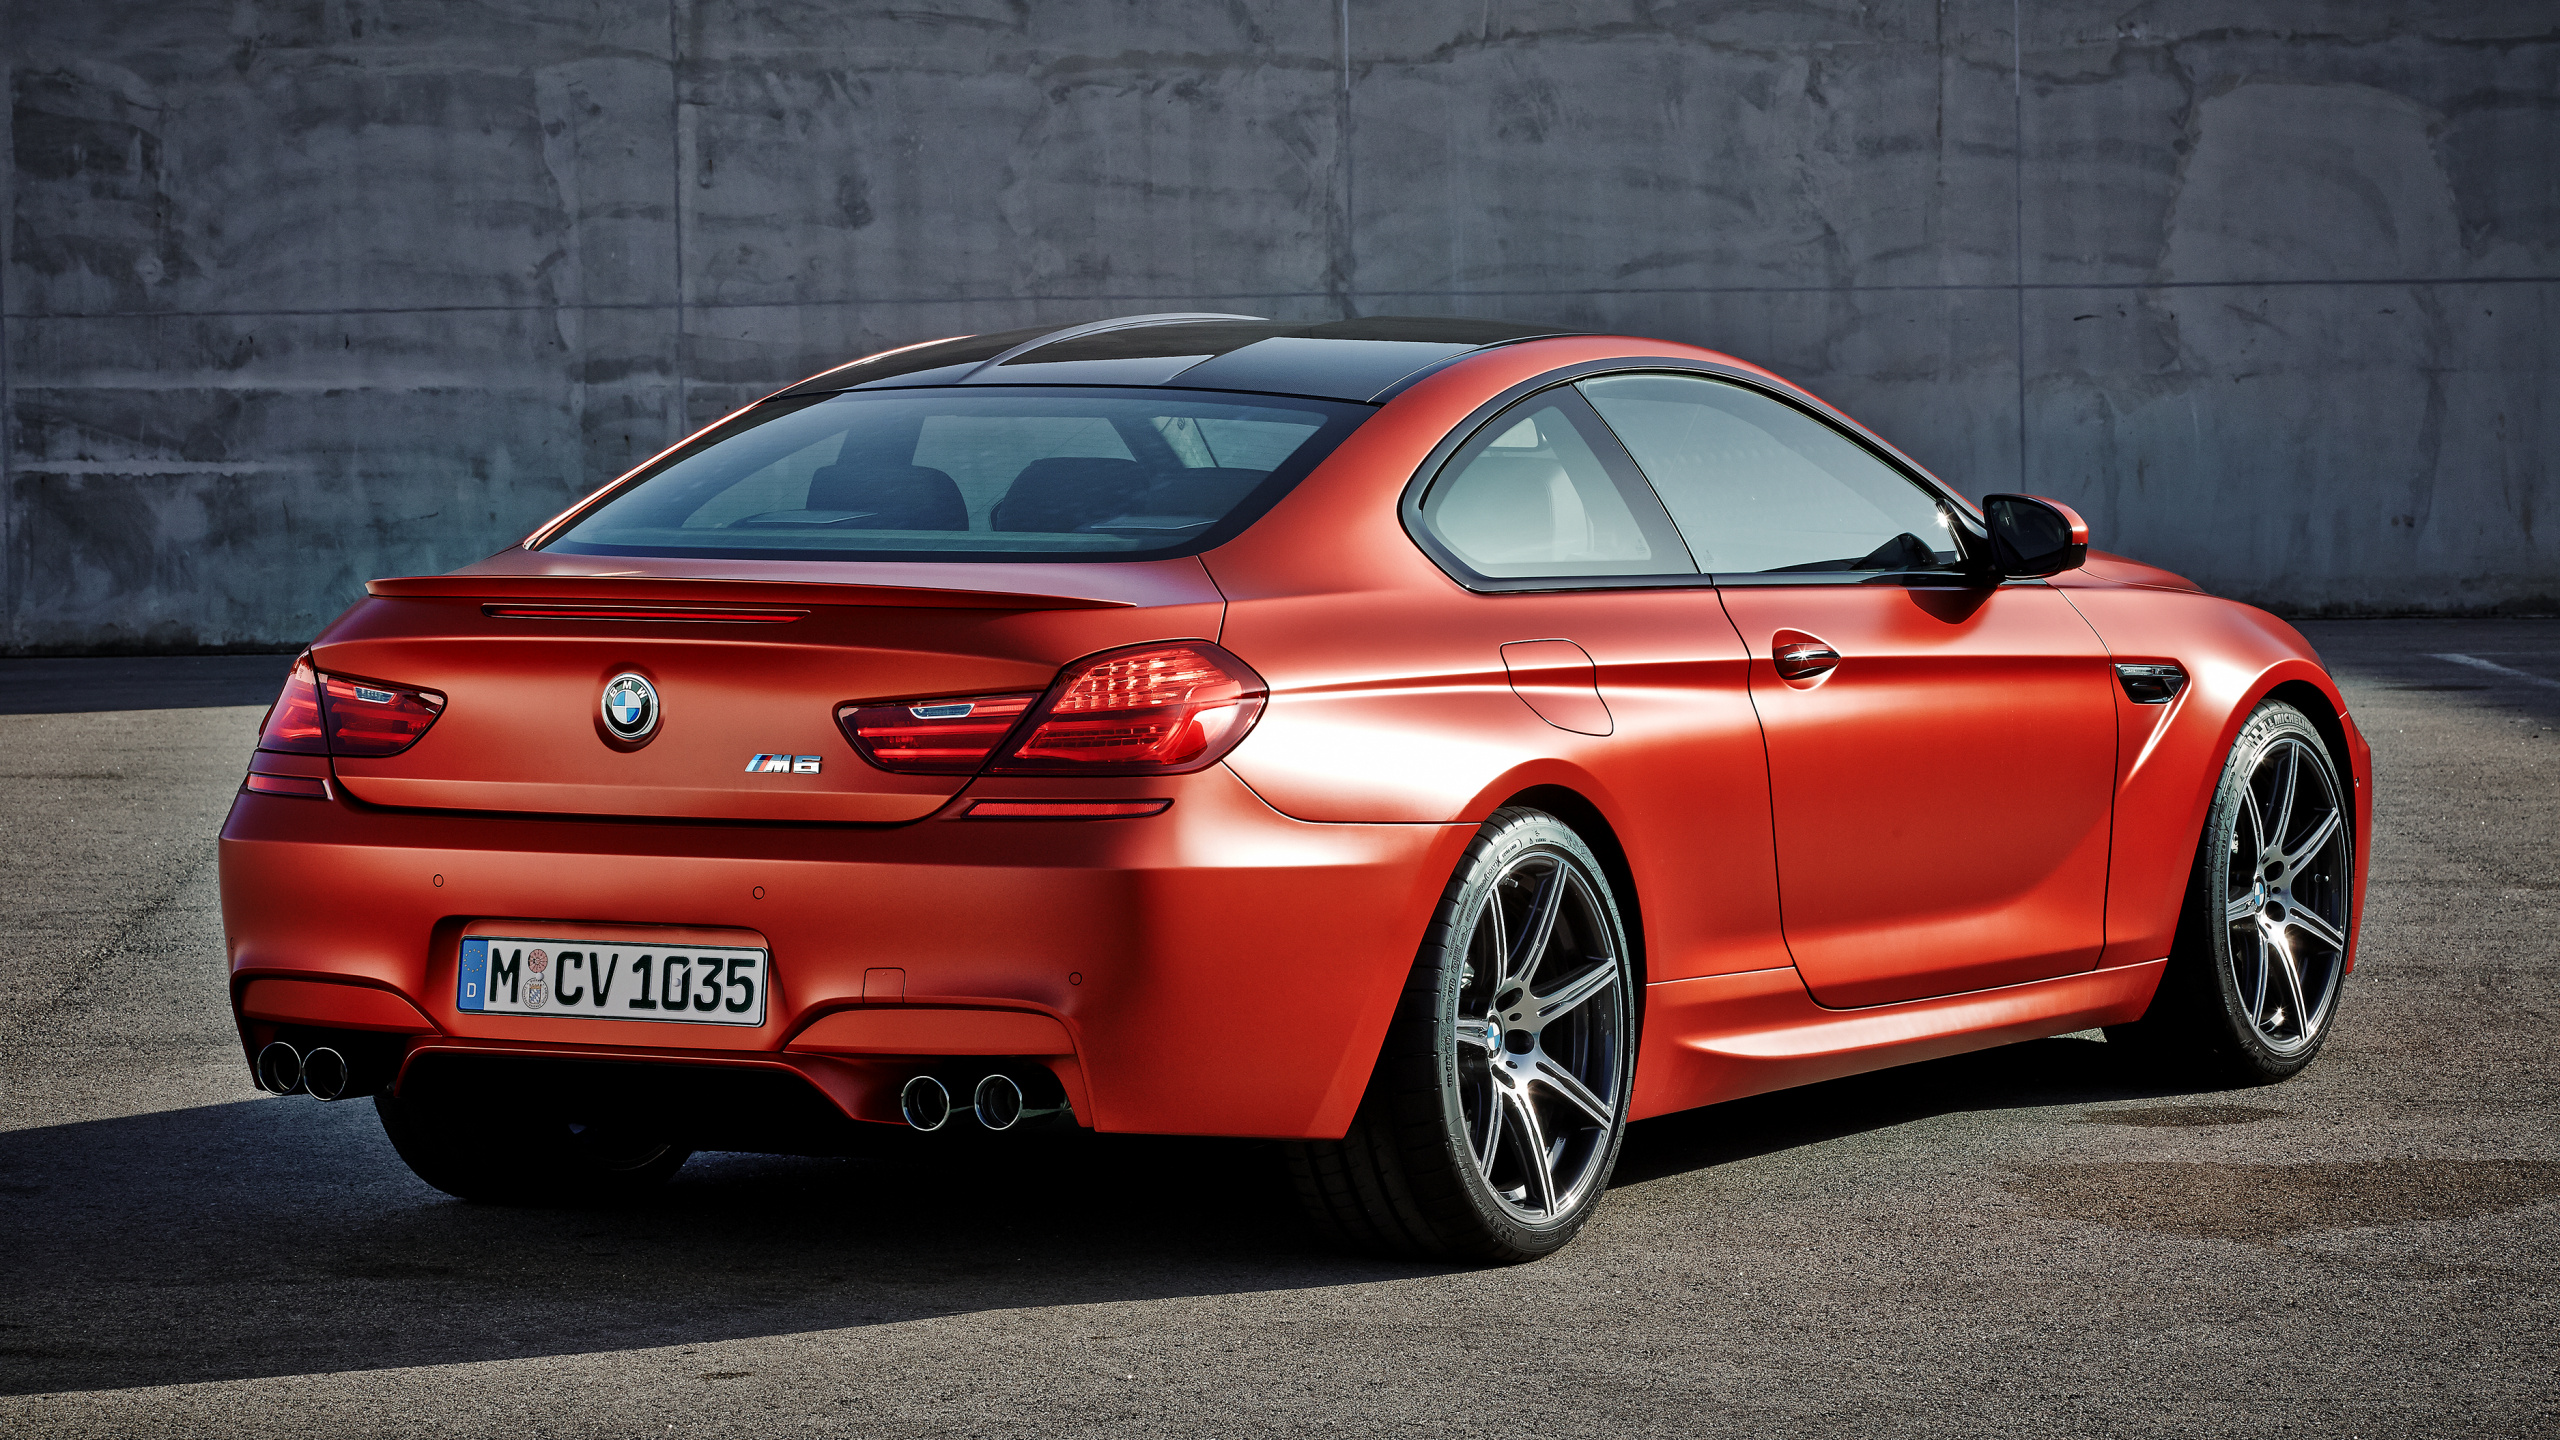 Bmw m 3 Coupé Rouge. Wallpaper in 2560x1440 Resolution